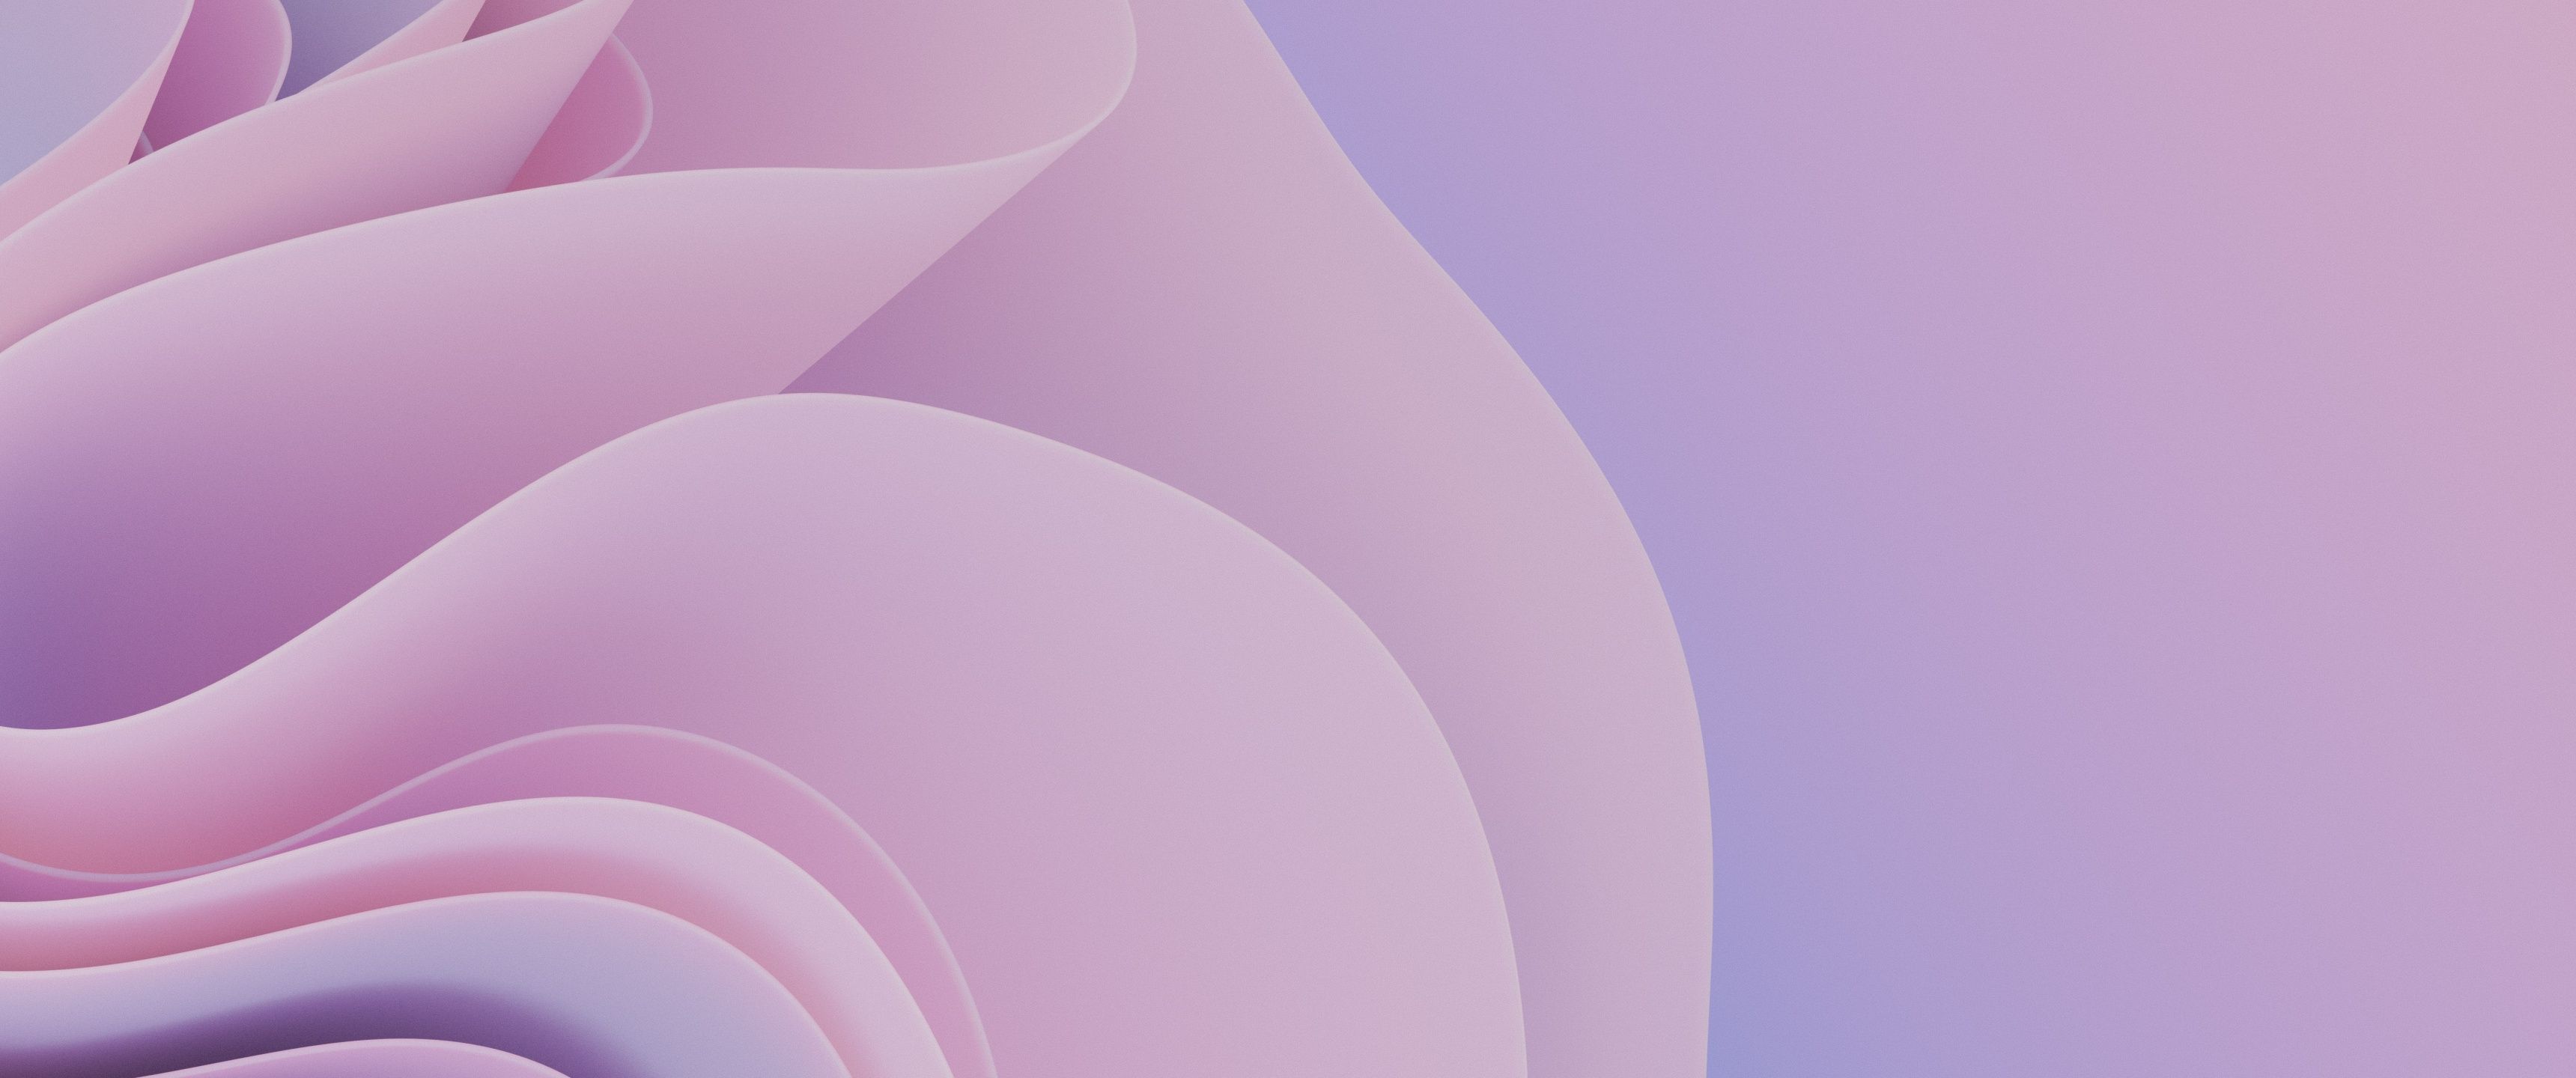 A purple and pink abstract artwork - 3440x1440